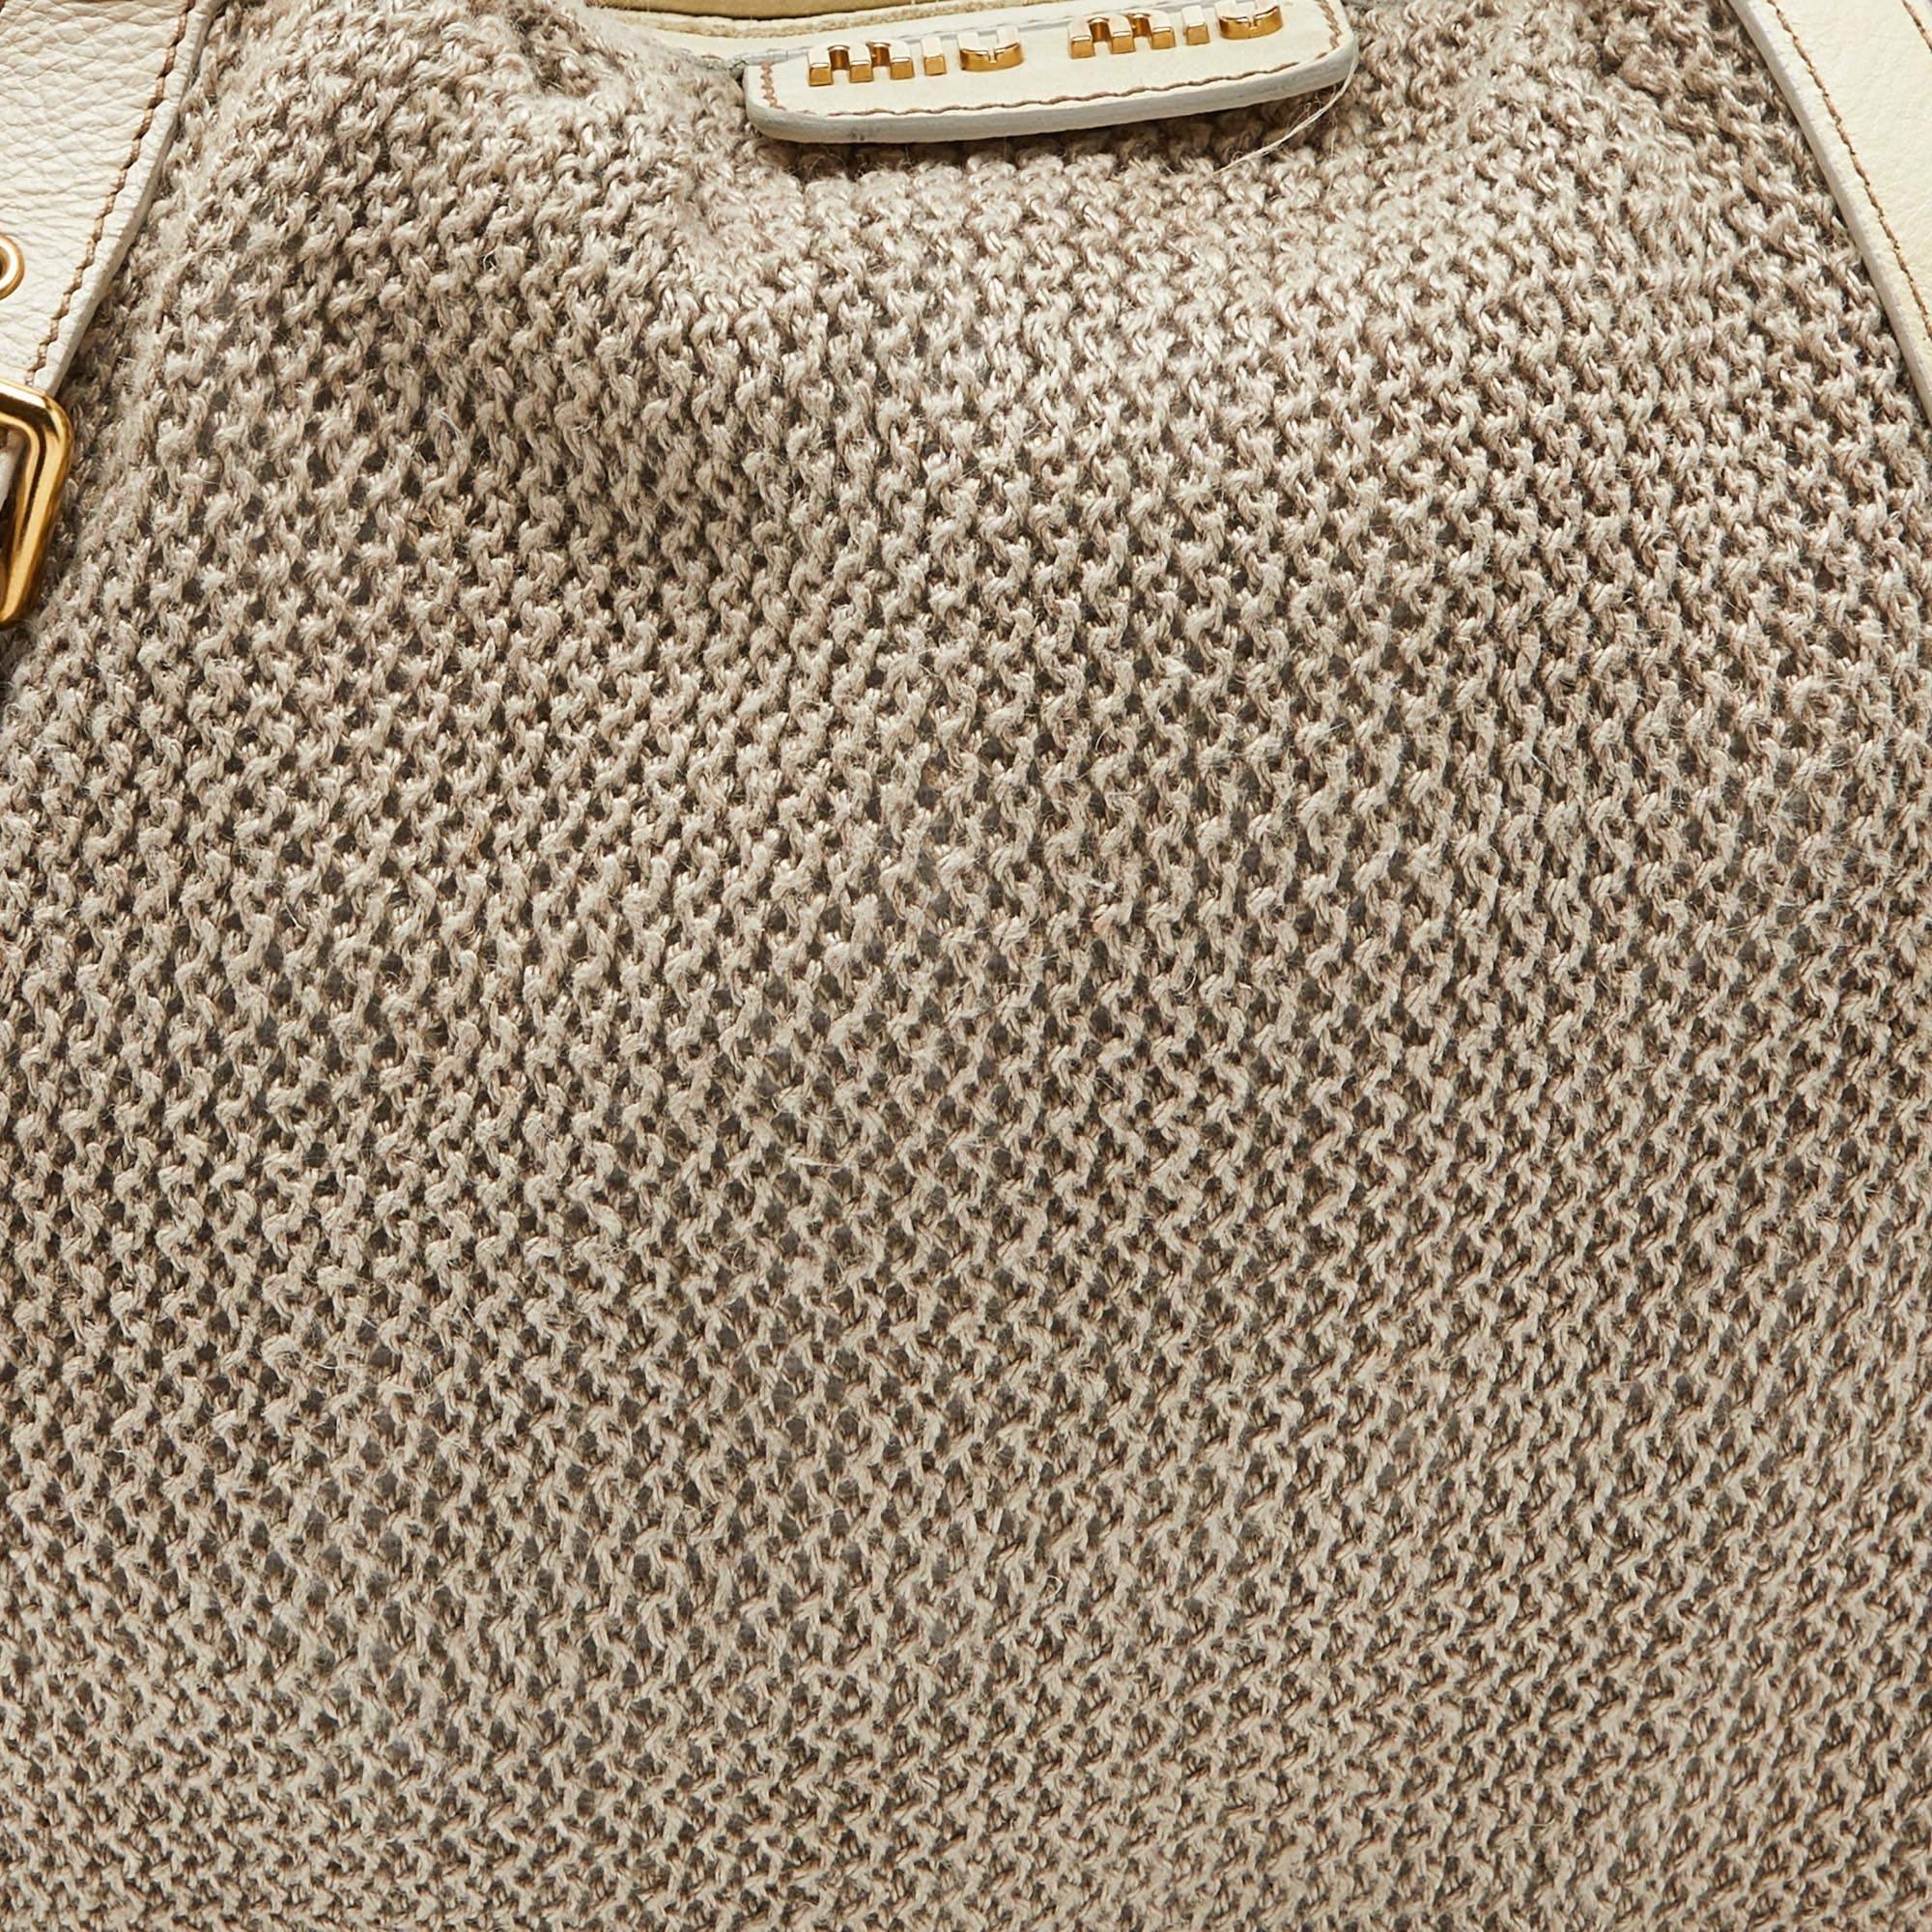 Miu Miu Cream Woven Fabric and Leather Satchel For Sale 6